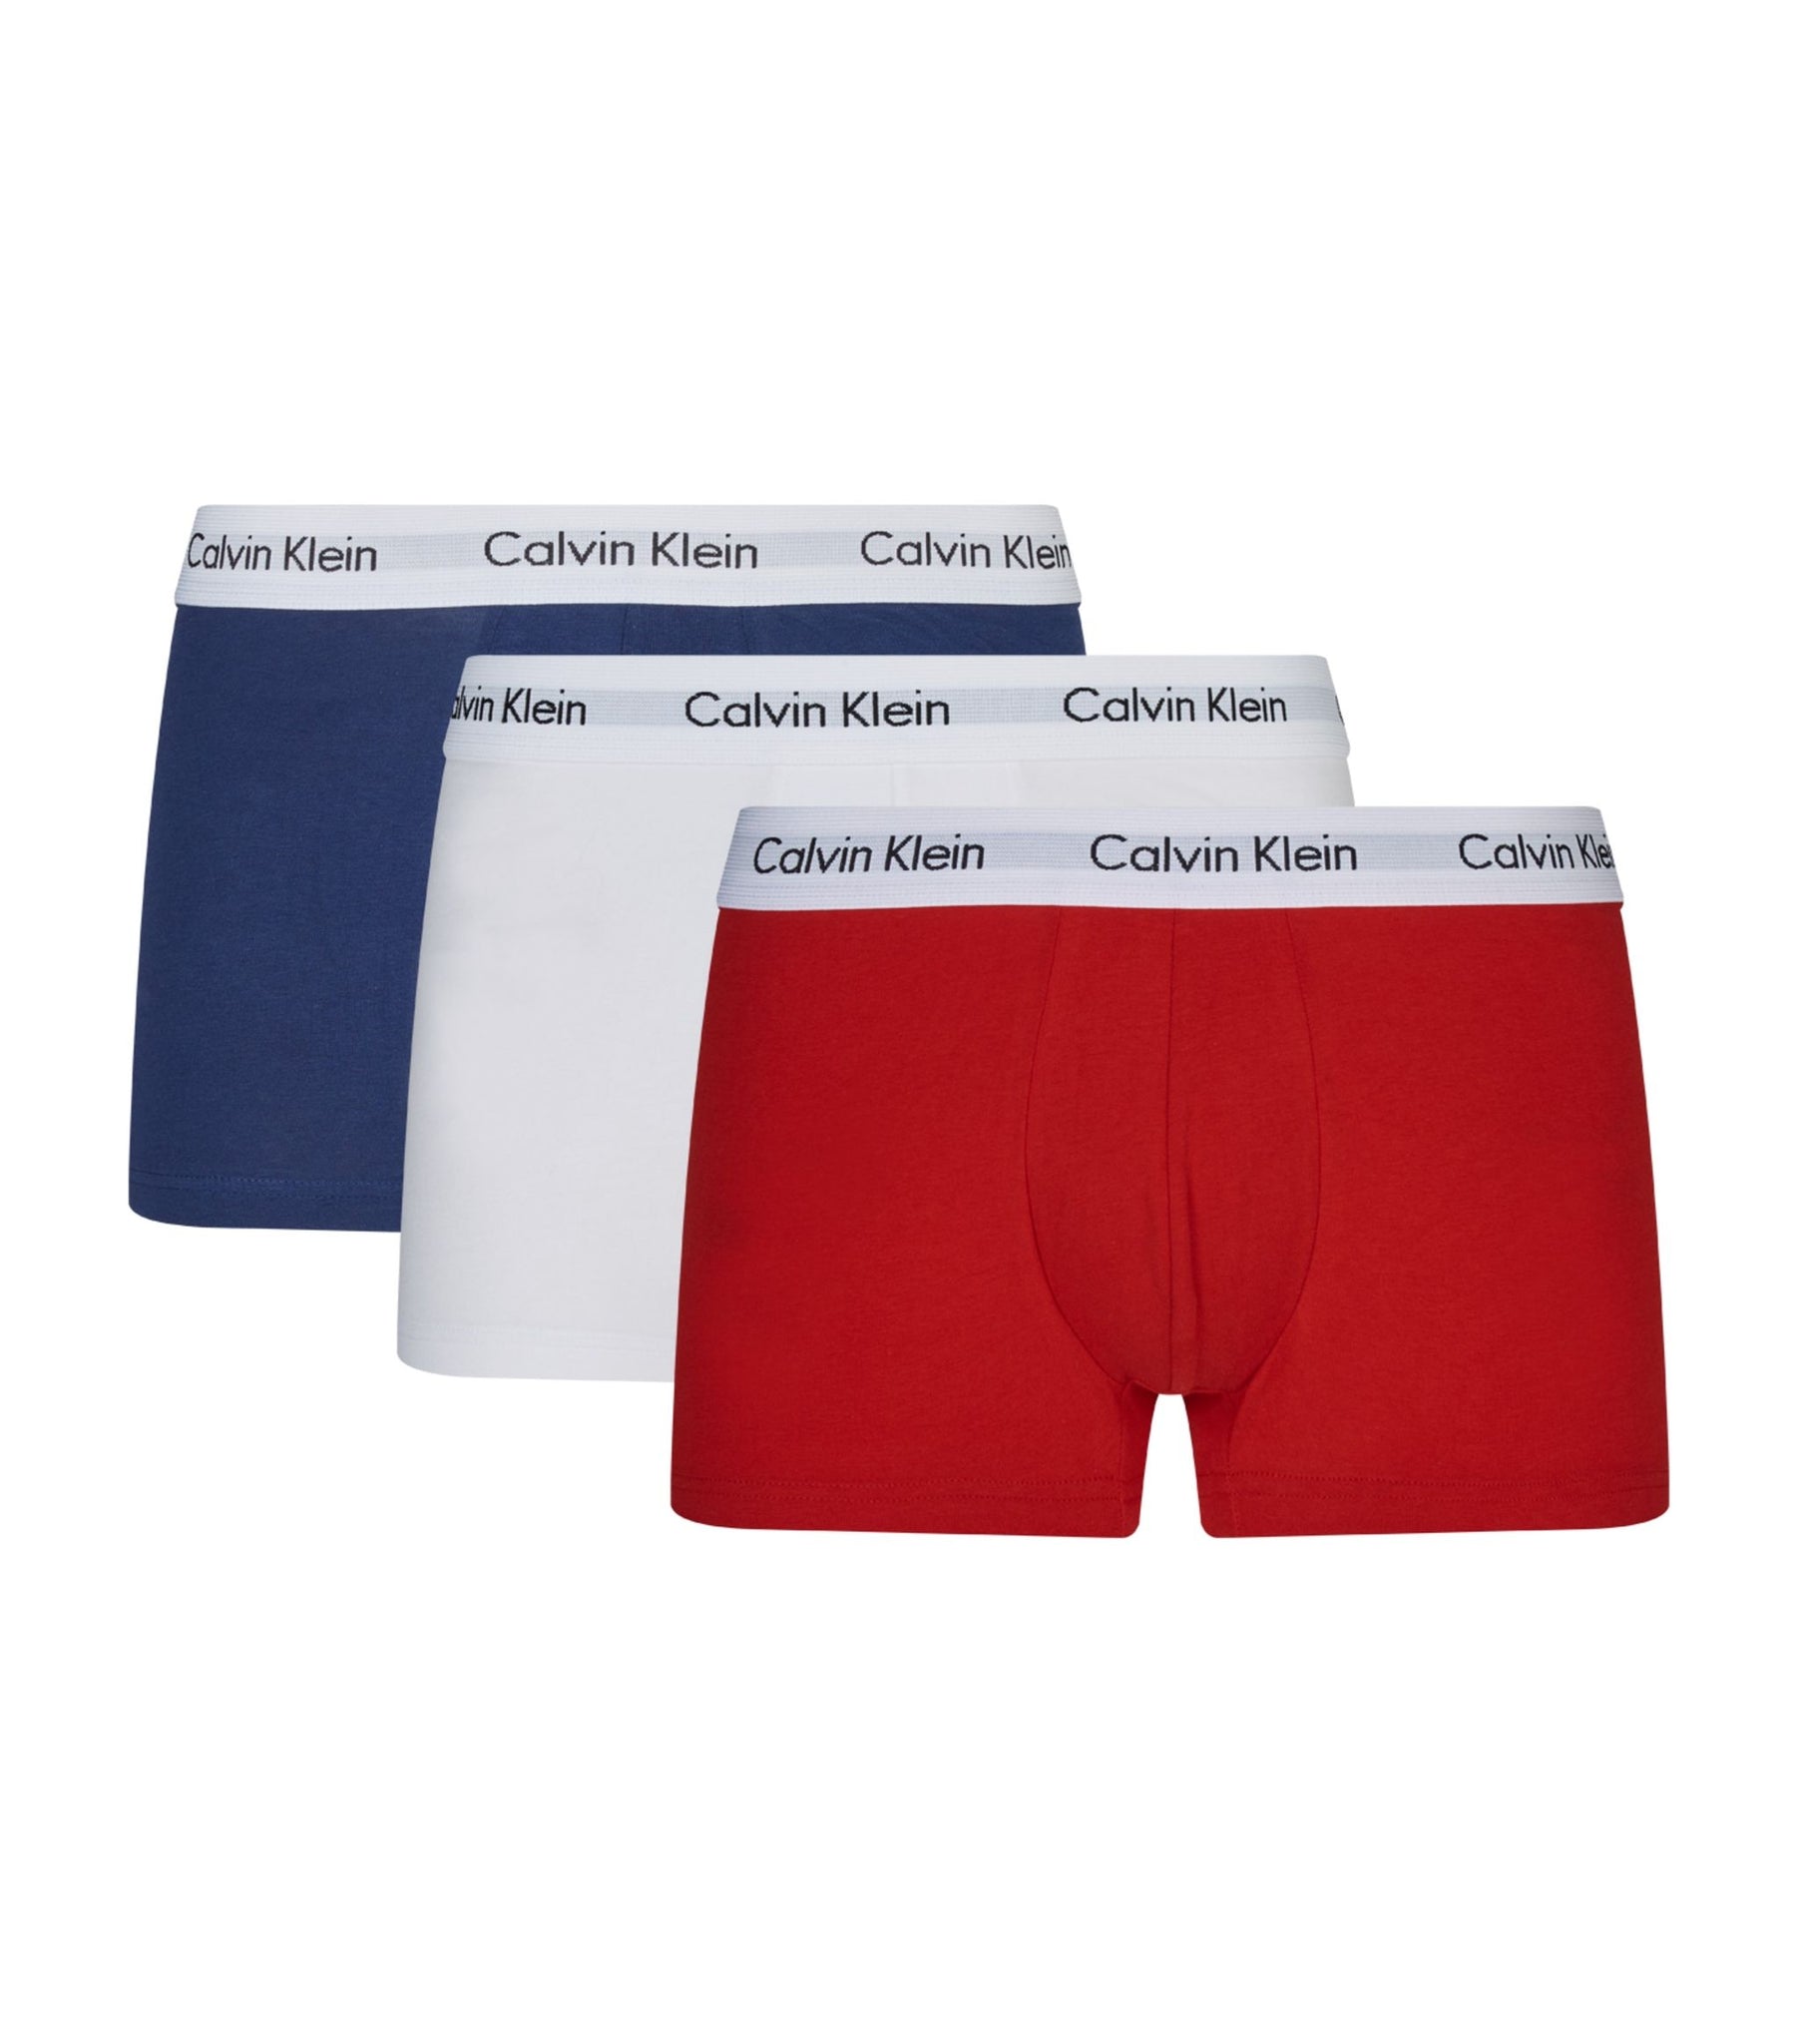 Calvin Klein Low Rise Men's Trunks (Pack of 3) Briefs, Boxers, Shorts